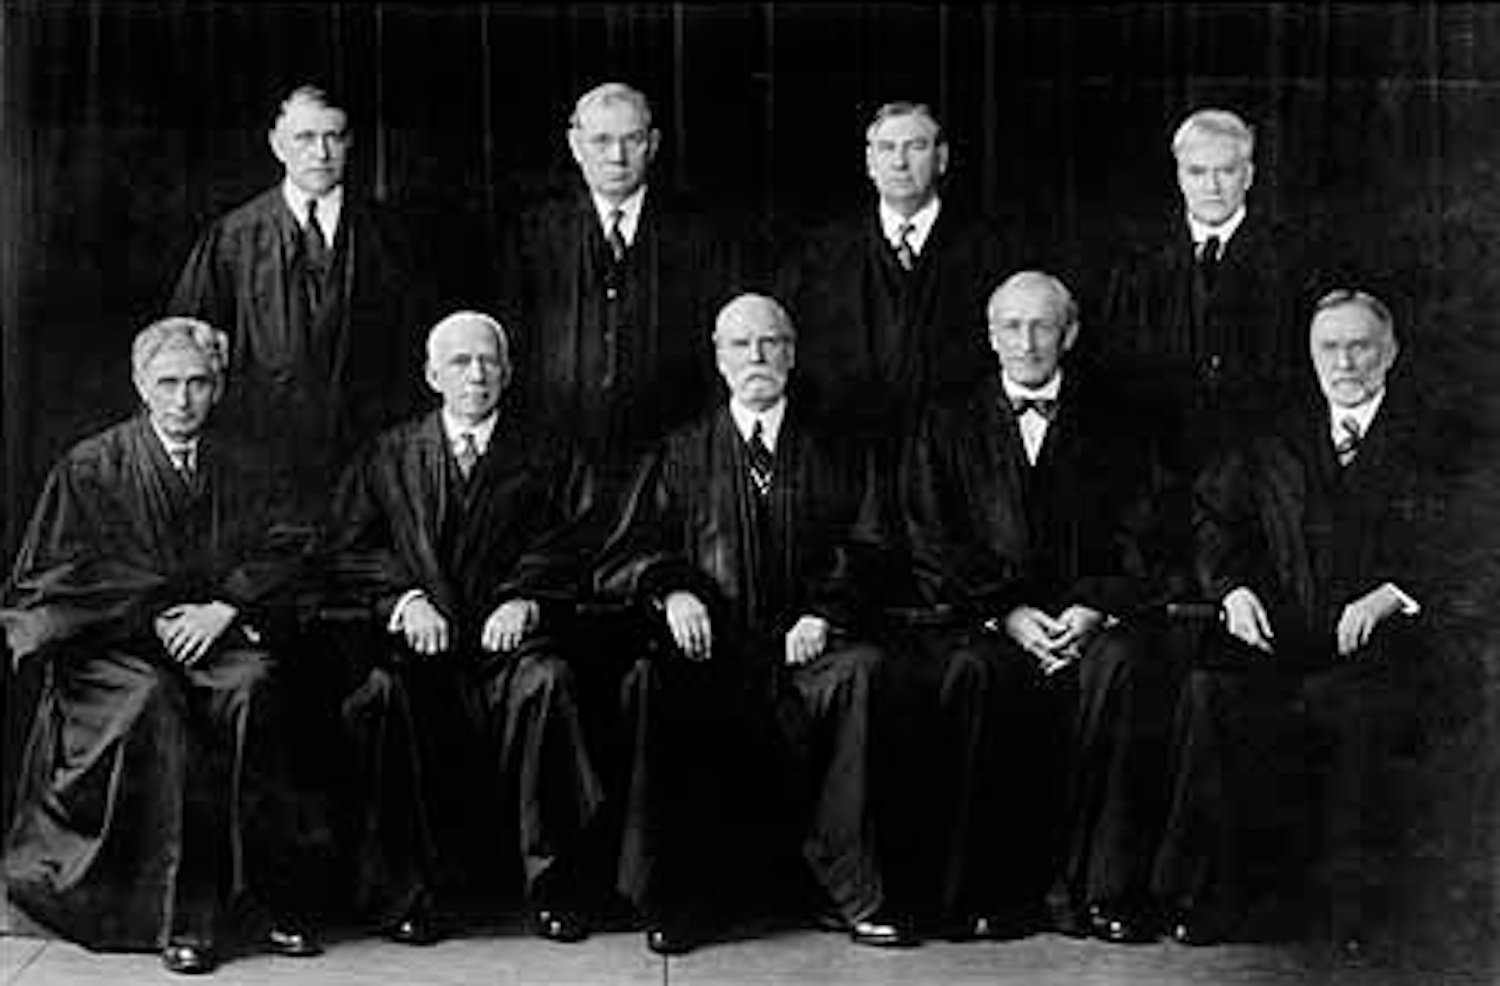 February 5, 1937: President Franklin Roosevelt Proposes to ‘Pack’ the Supreme Court